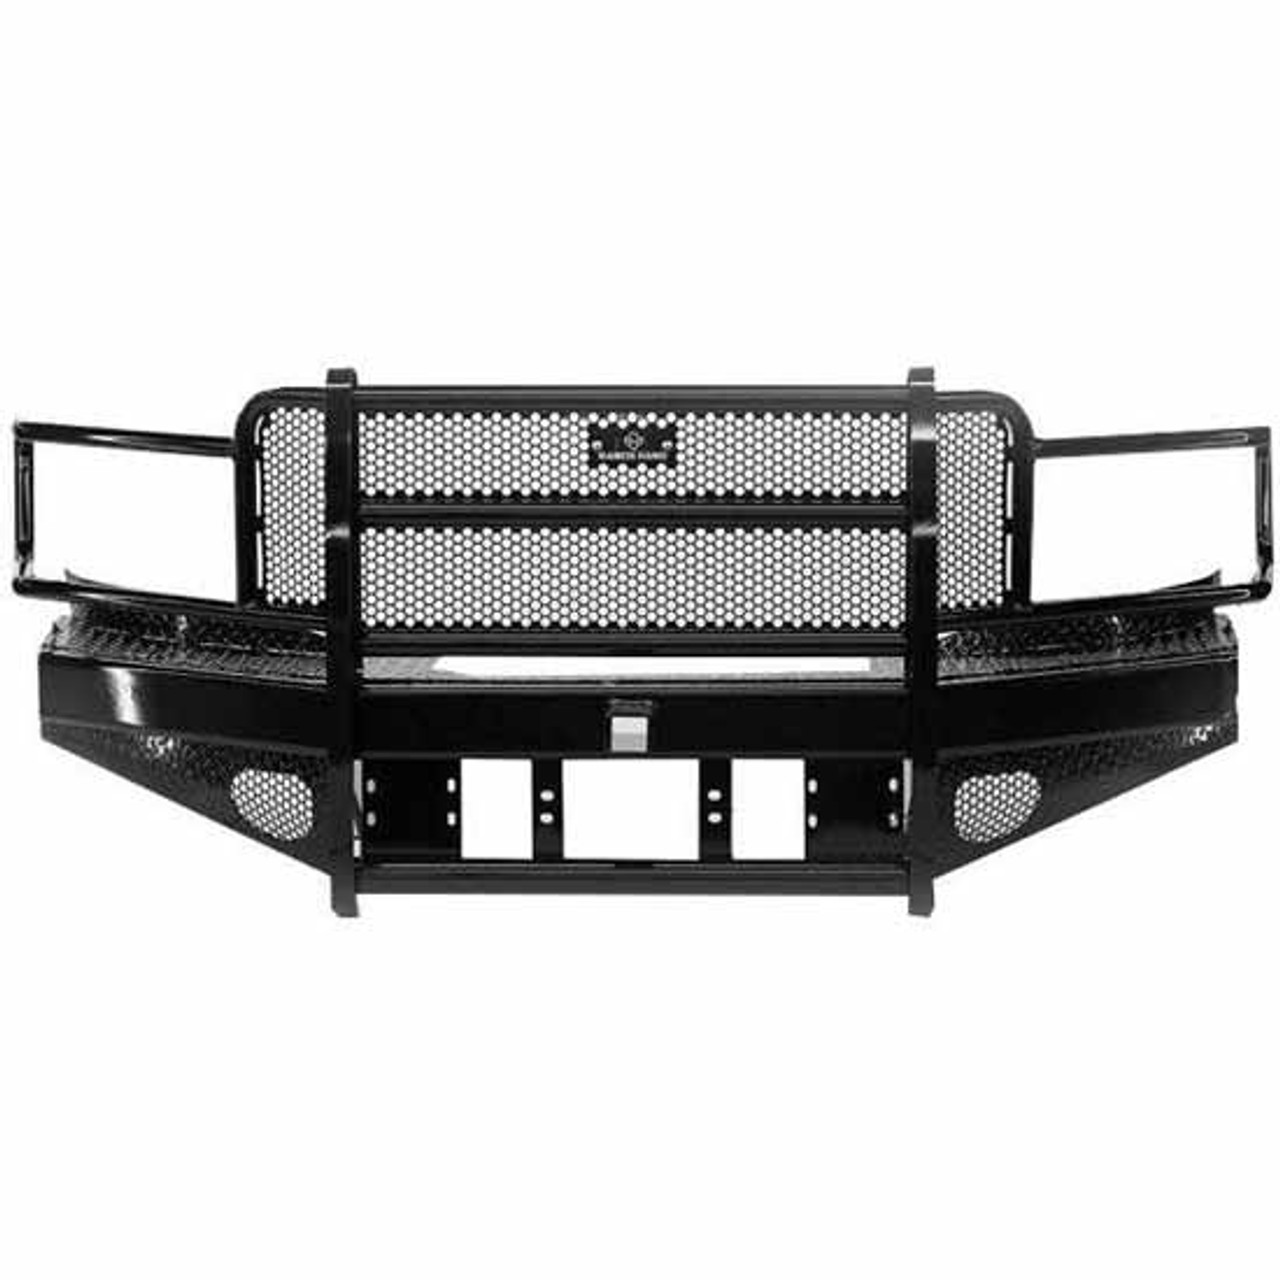 Ranch Hand Summit Black Steel Bullnose Front Bumper, 12 Gauge W/ Hoop, Tow  Hooks For Ford F250, F350, F450, F550 Super Duty 2011-2016 - 4 State Trucks